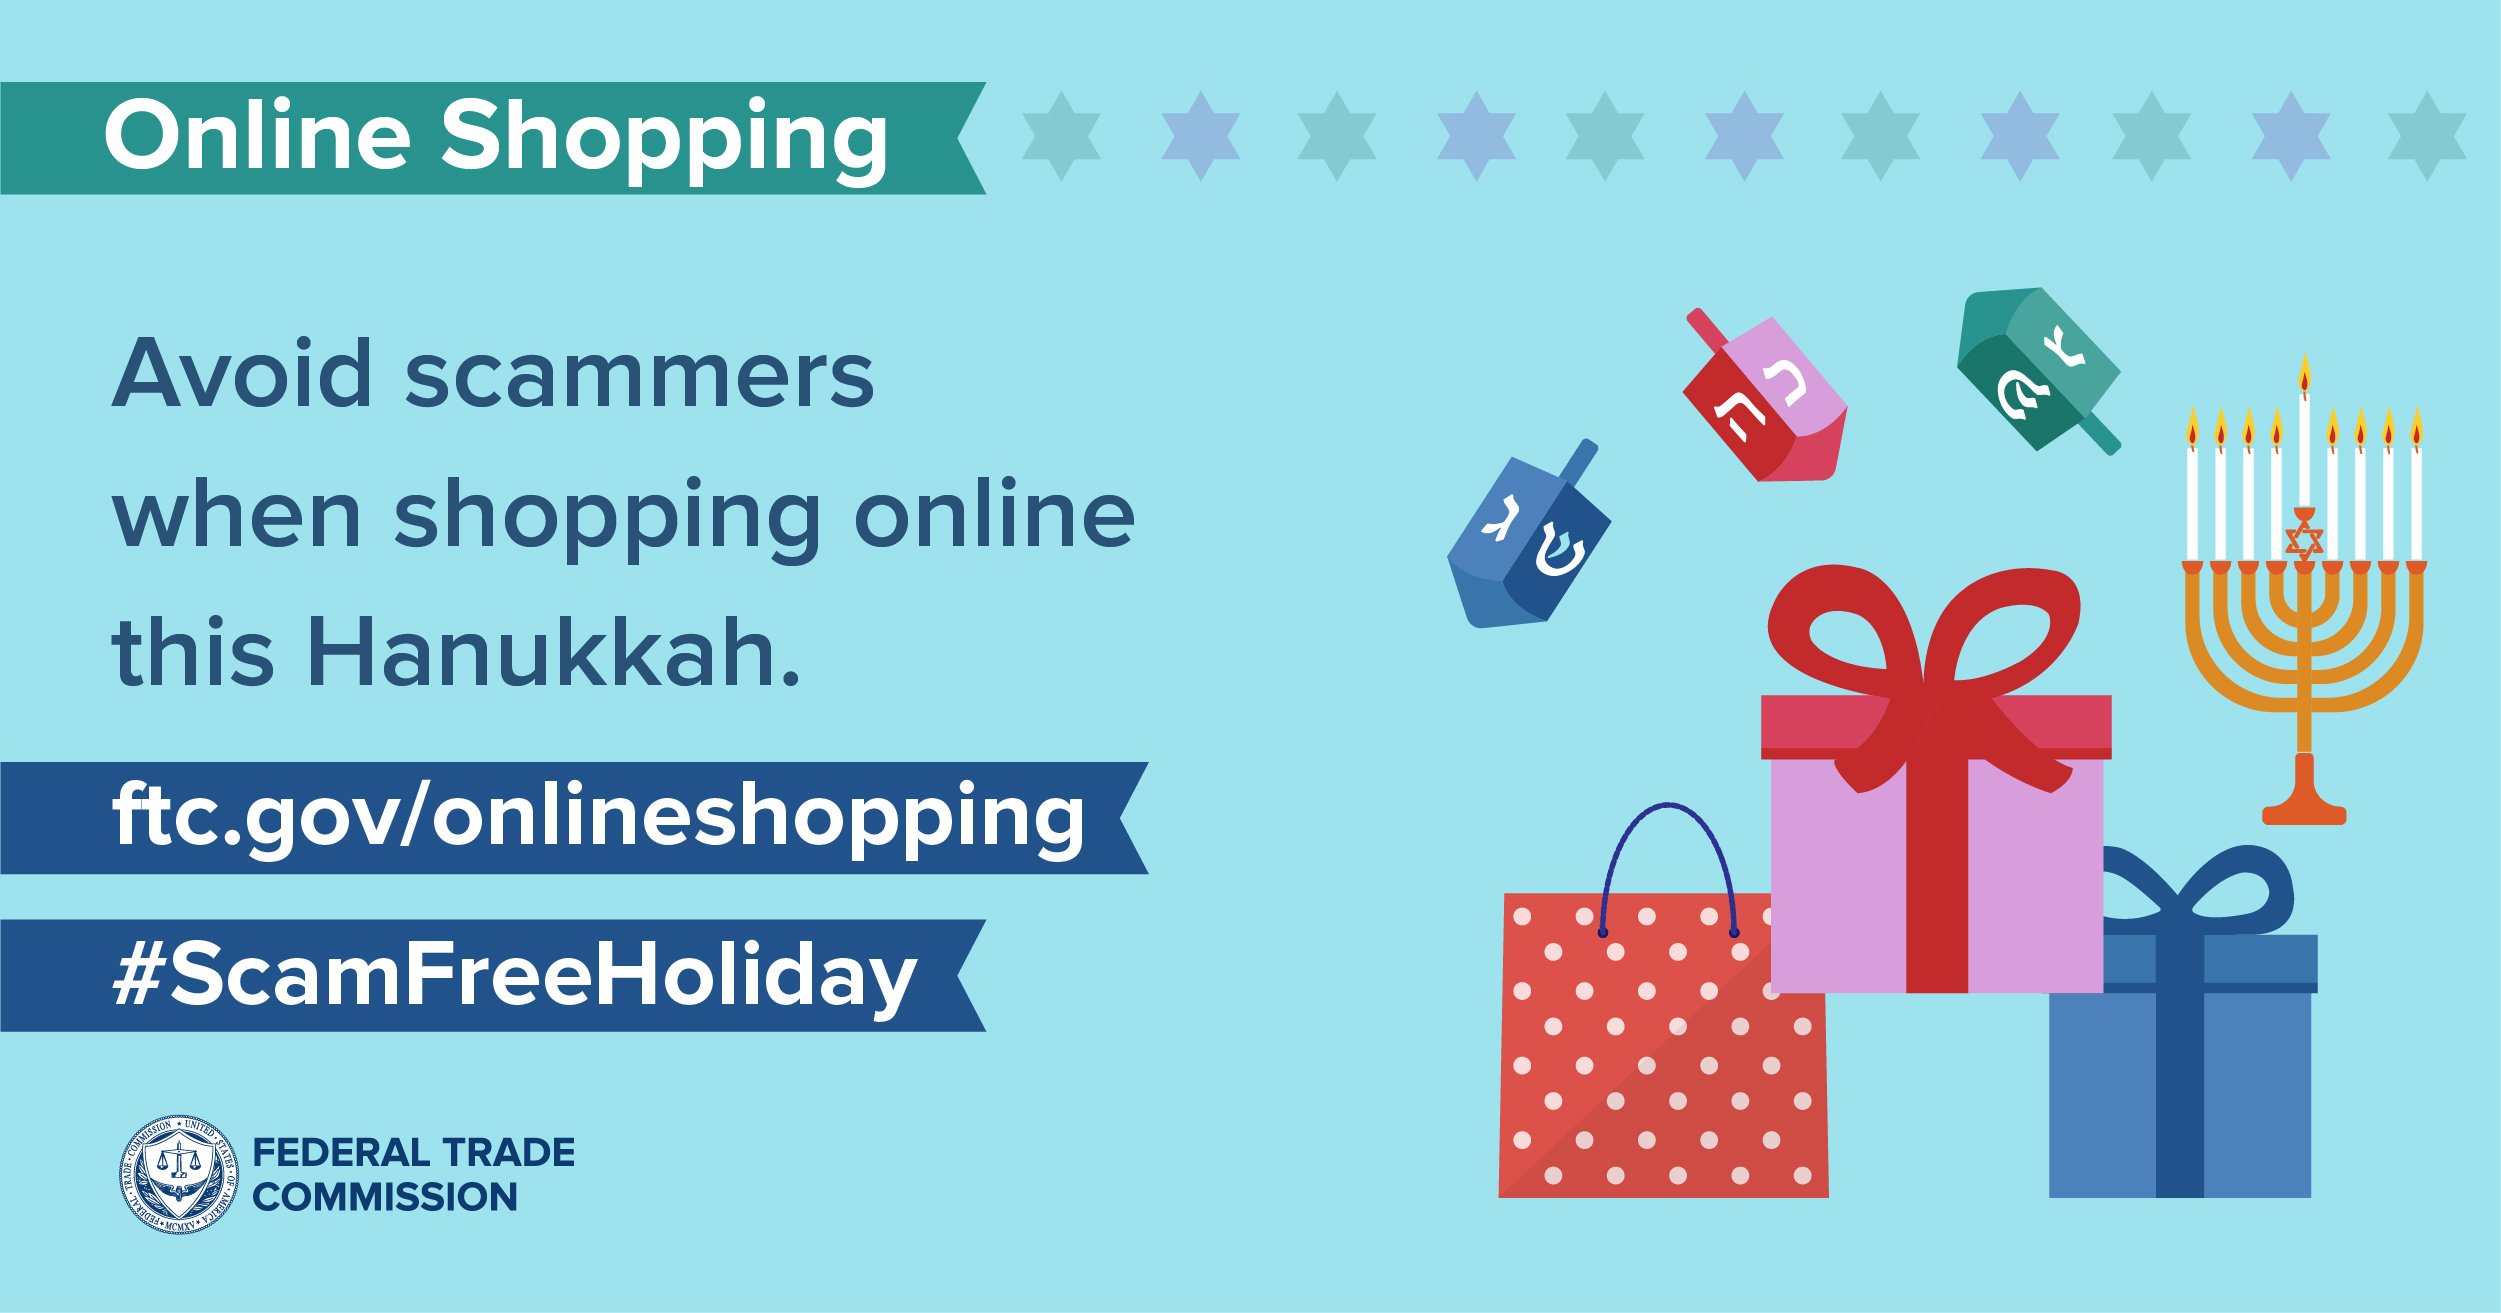 Avoid scammers when shopping online this Hanukkah. ftc.gov/onlineshopping  #ScamFreeHoliday